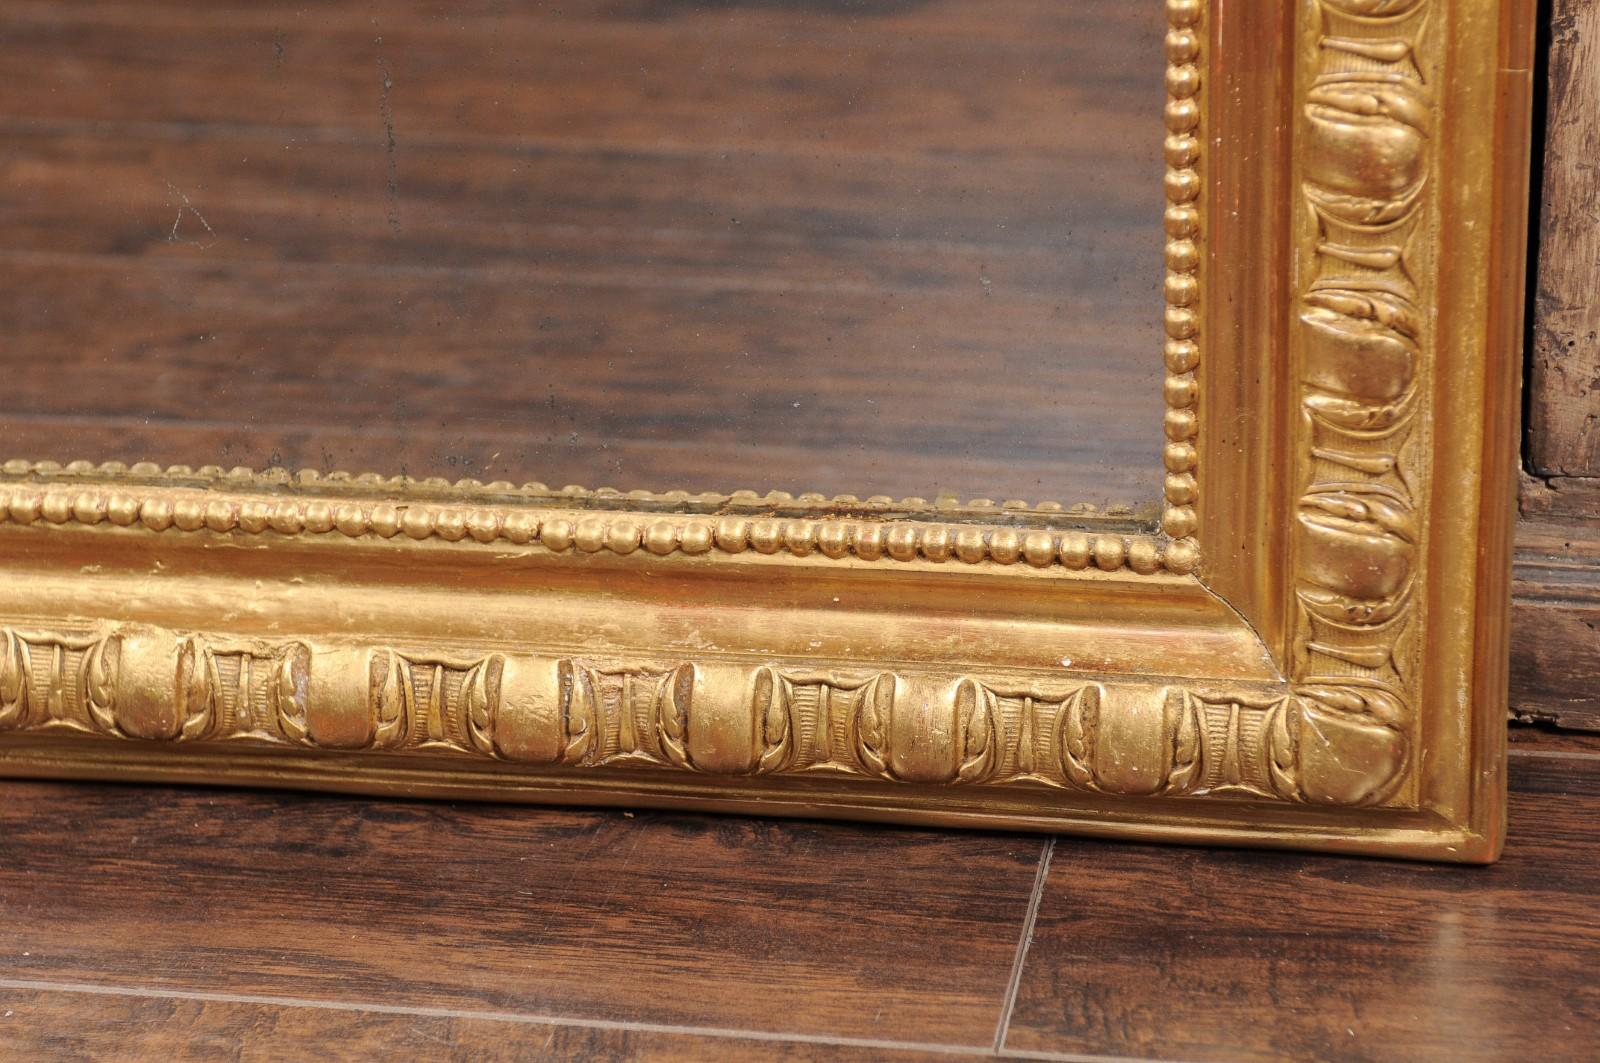 20th Century French Giltwood Wall Mirror with Carved Frame and Beaded Motifs, circa 1900